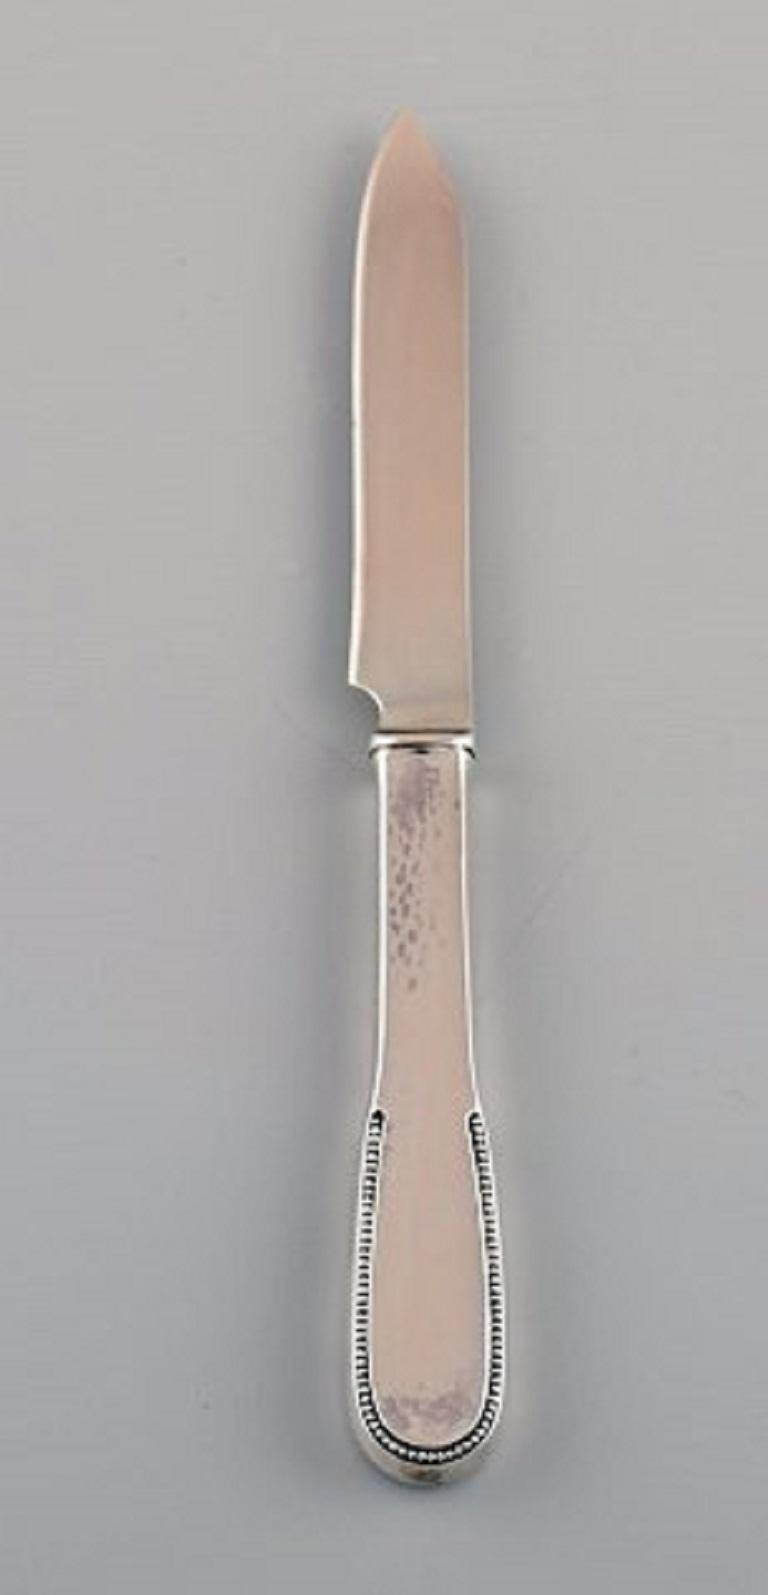 Four Evald Nielsen number 14 fruit knives in hammered silver, 1920s.
Measure: Length: 16.5 cm.
Stamped.
In excellent condition.
Our skilled Georg Jensen silversmith / goldsmith can polish all silver and gold so that it looks like new. The price